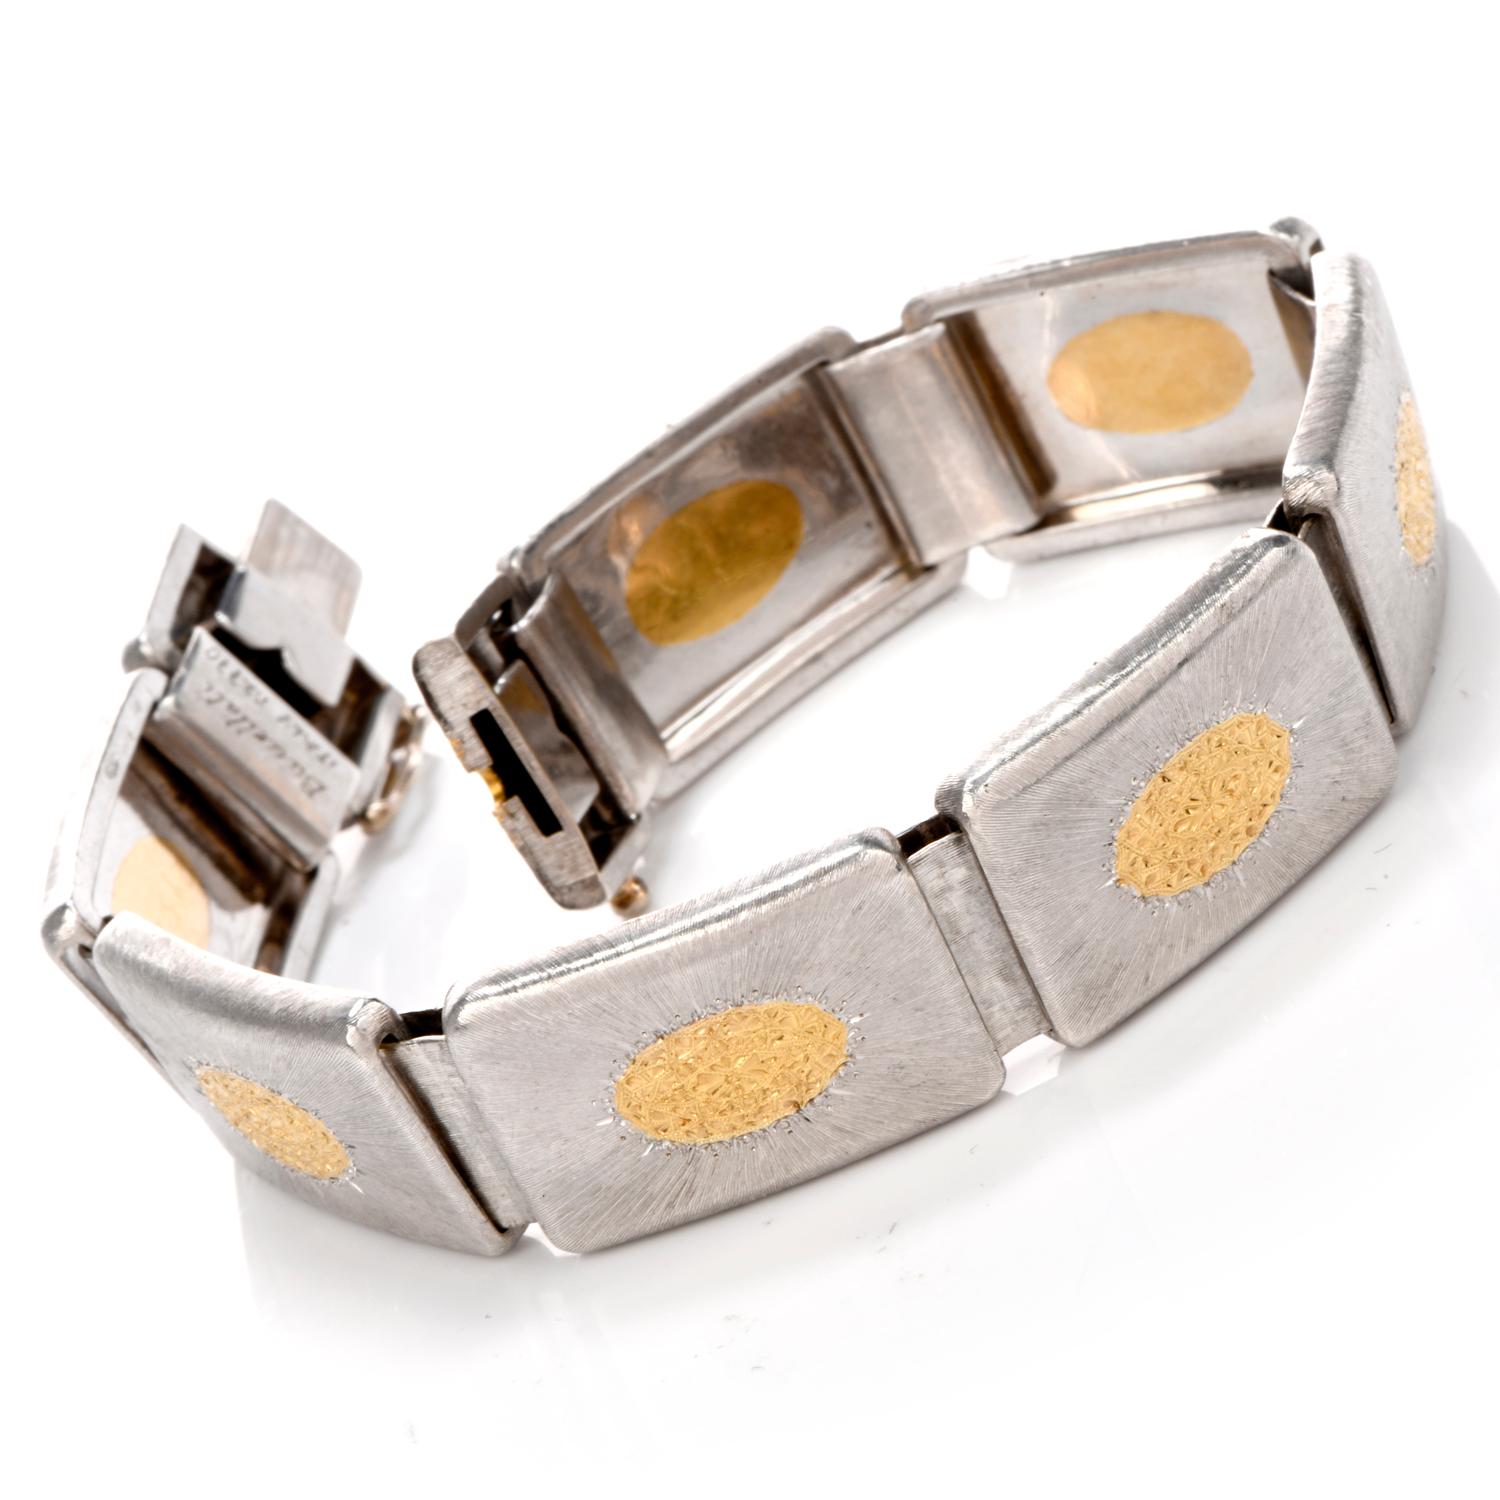 This graceful Buccellati unisex link bracelet is crafted in a combination of silver and 18-karat yellow gold, weighing 41.8 grams and measuring 7